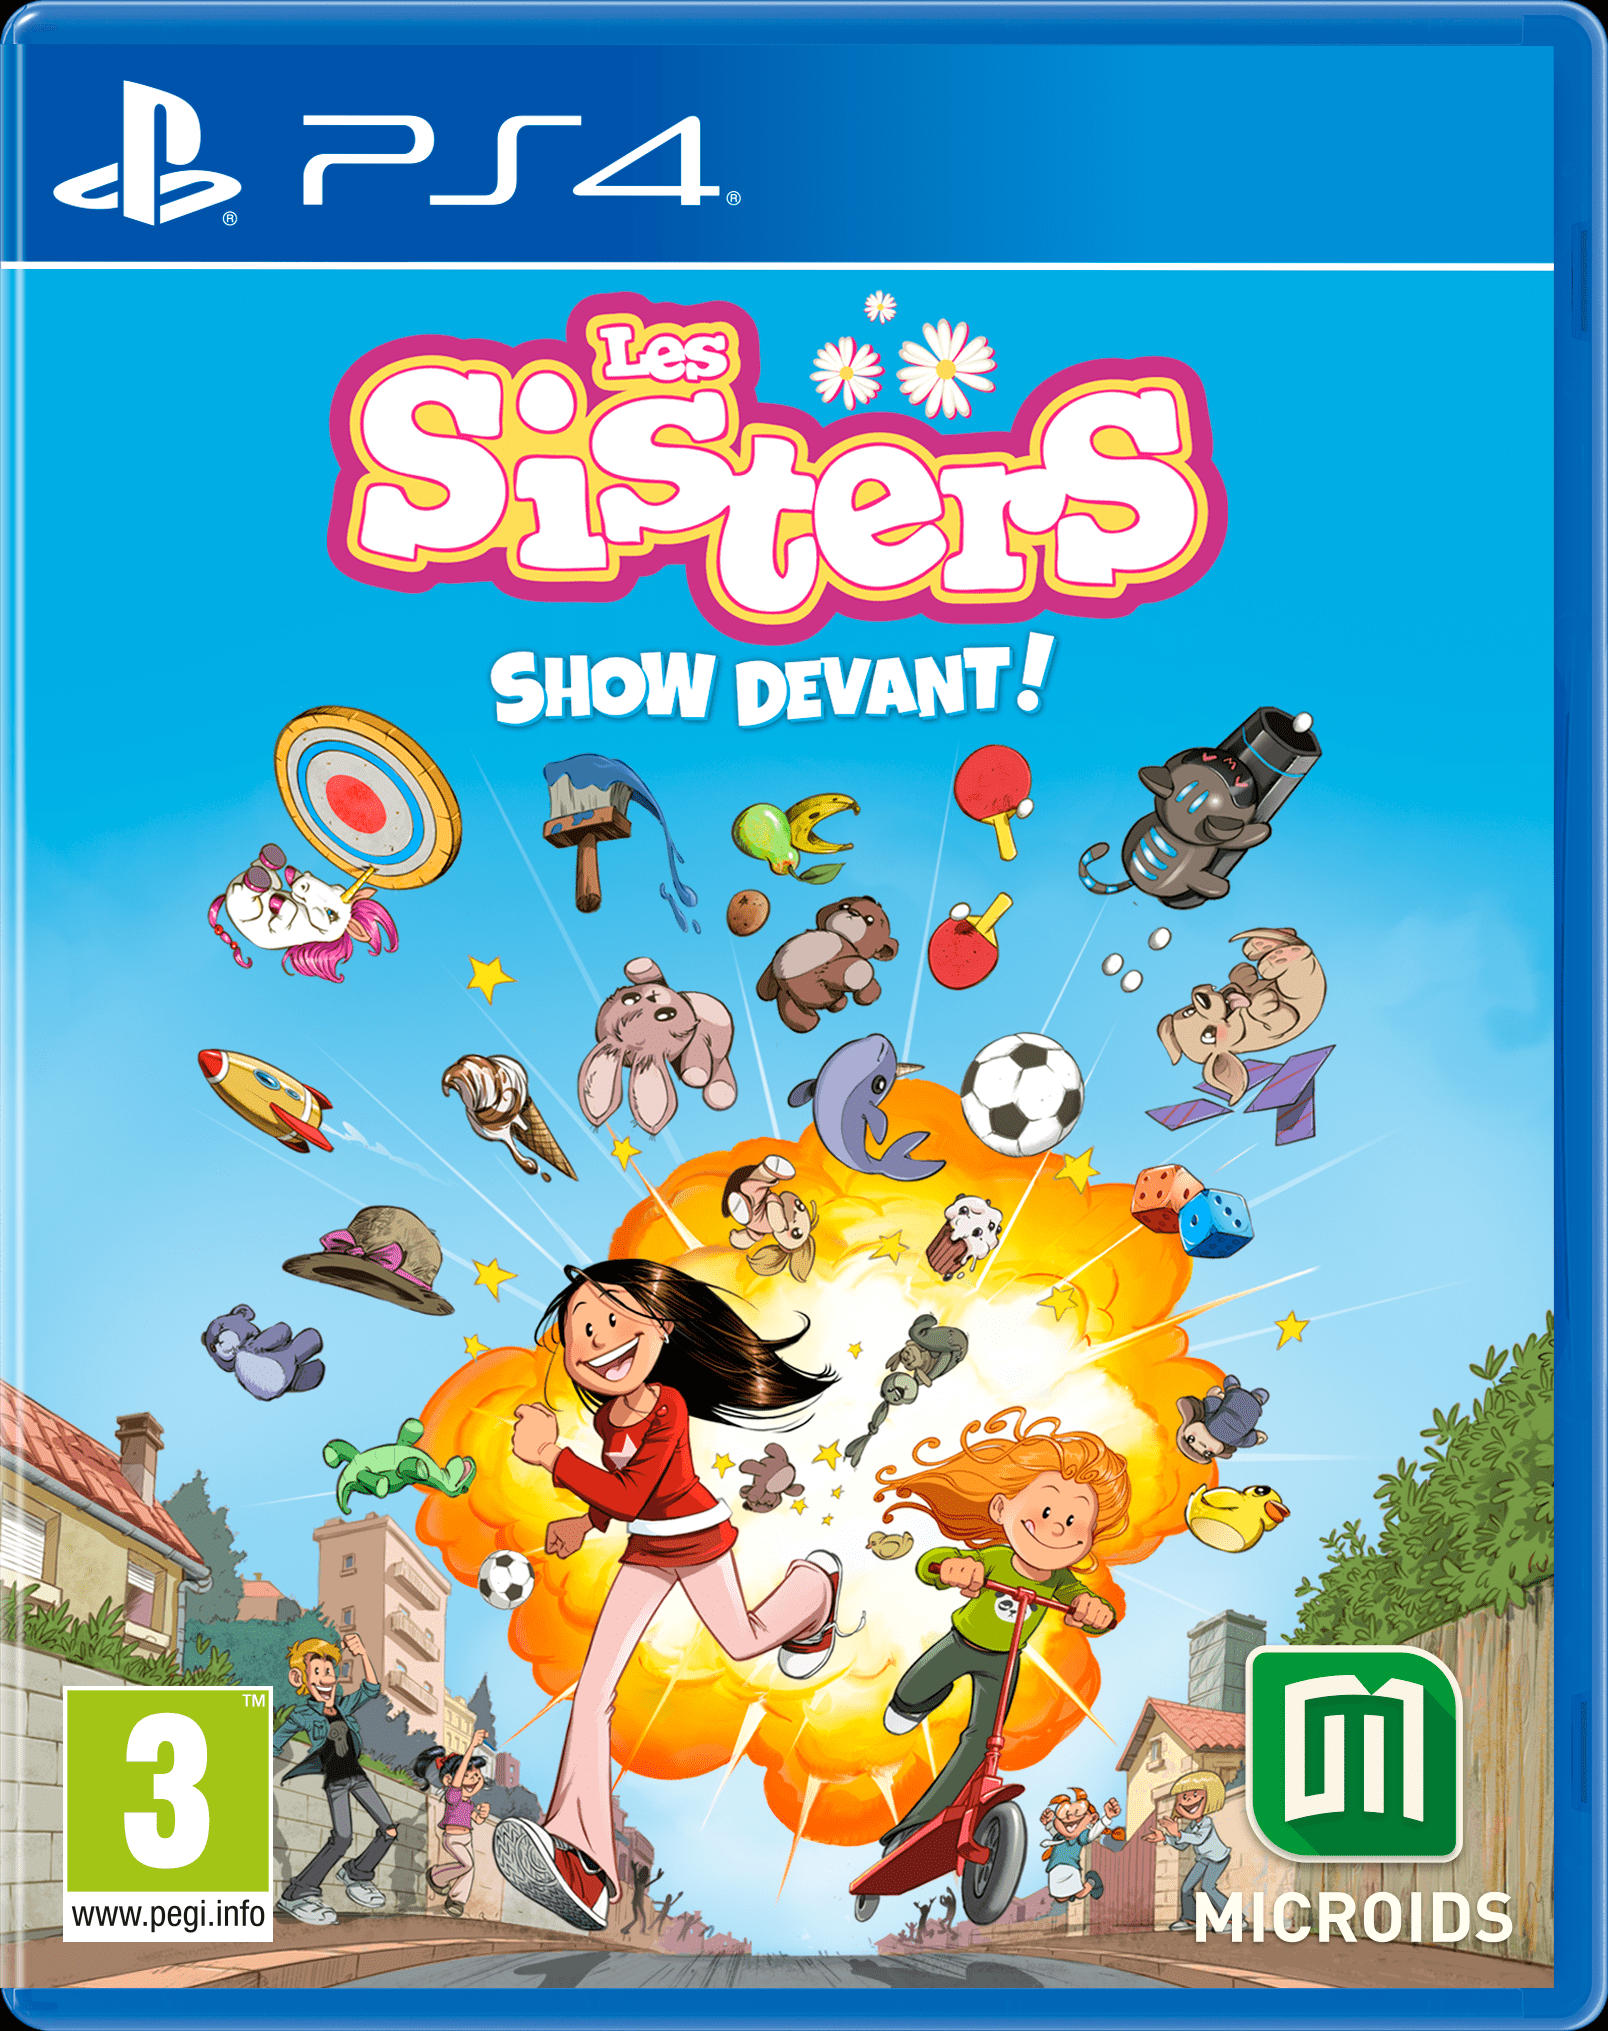 Les Sisters Show Devant ! - Xboxygen - Xbox One, PS4, Steam, Switch